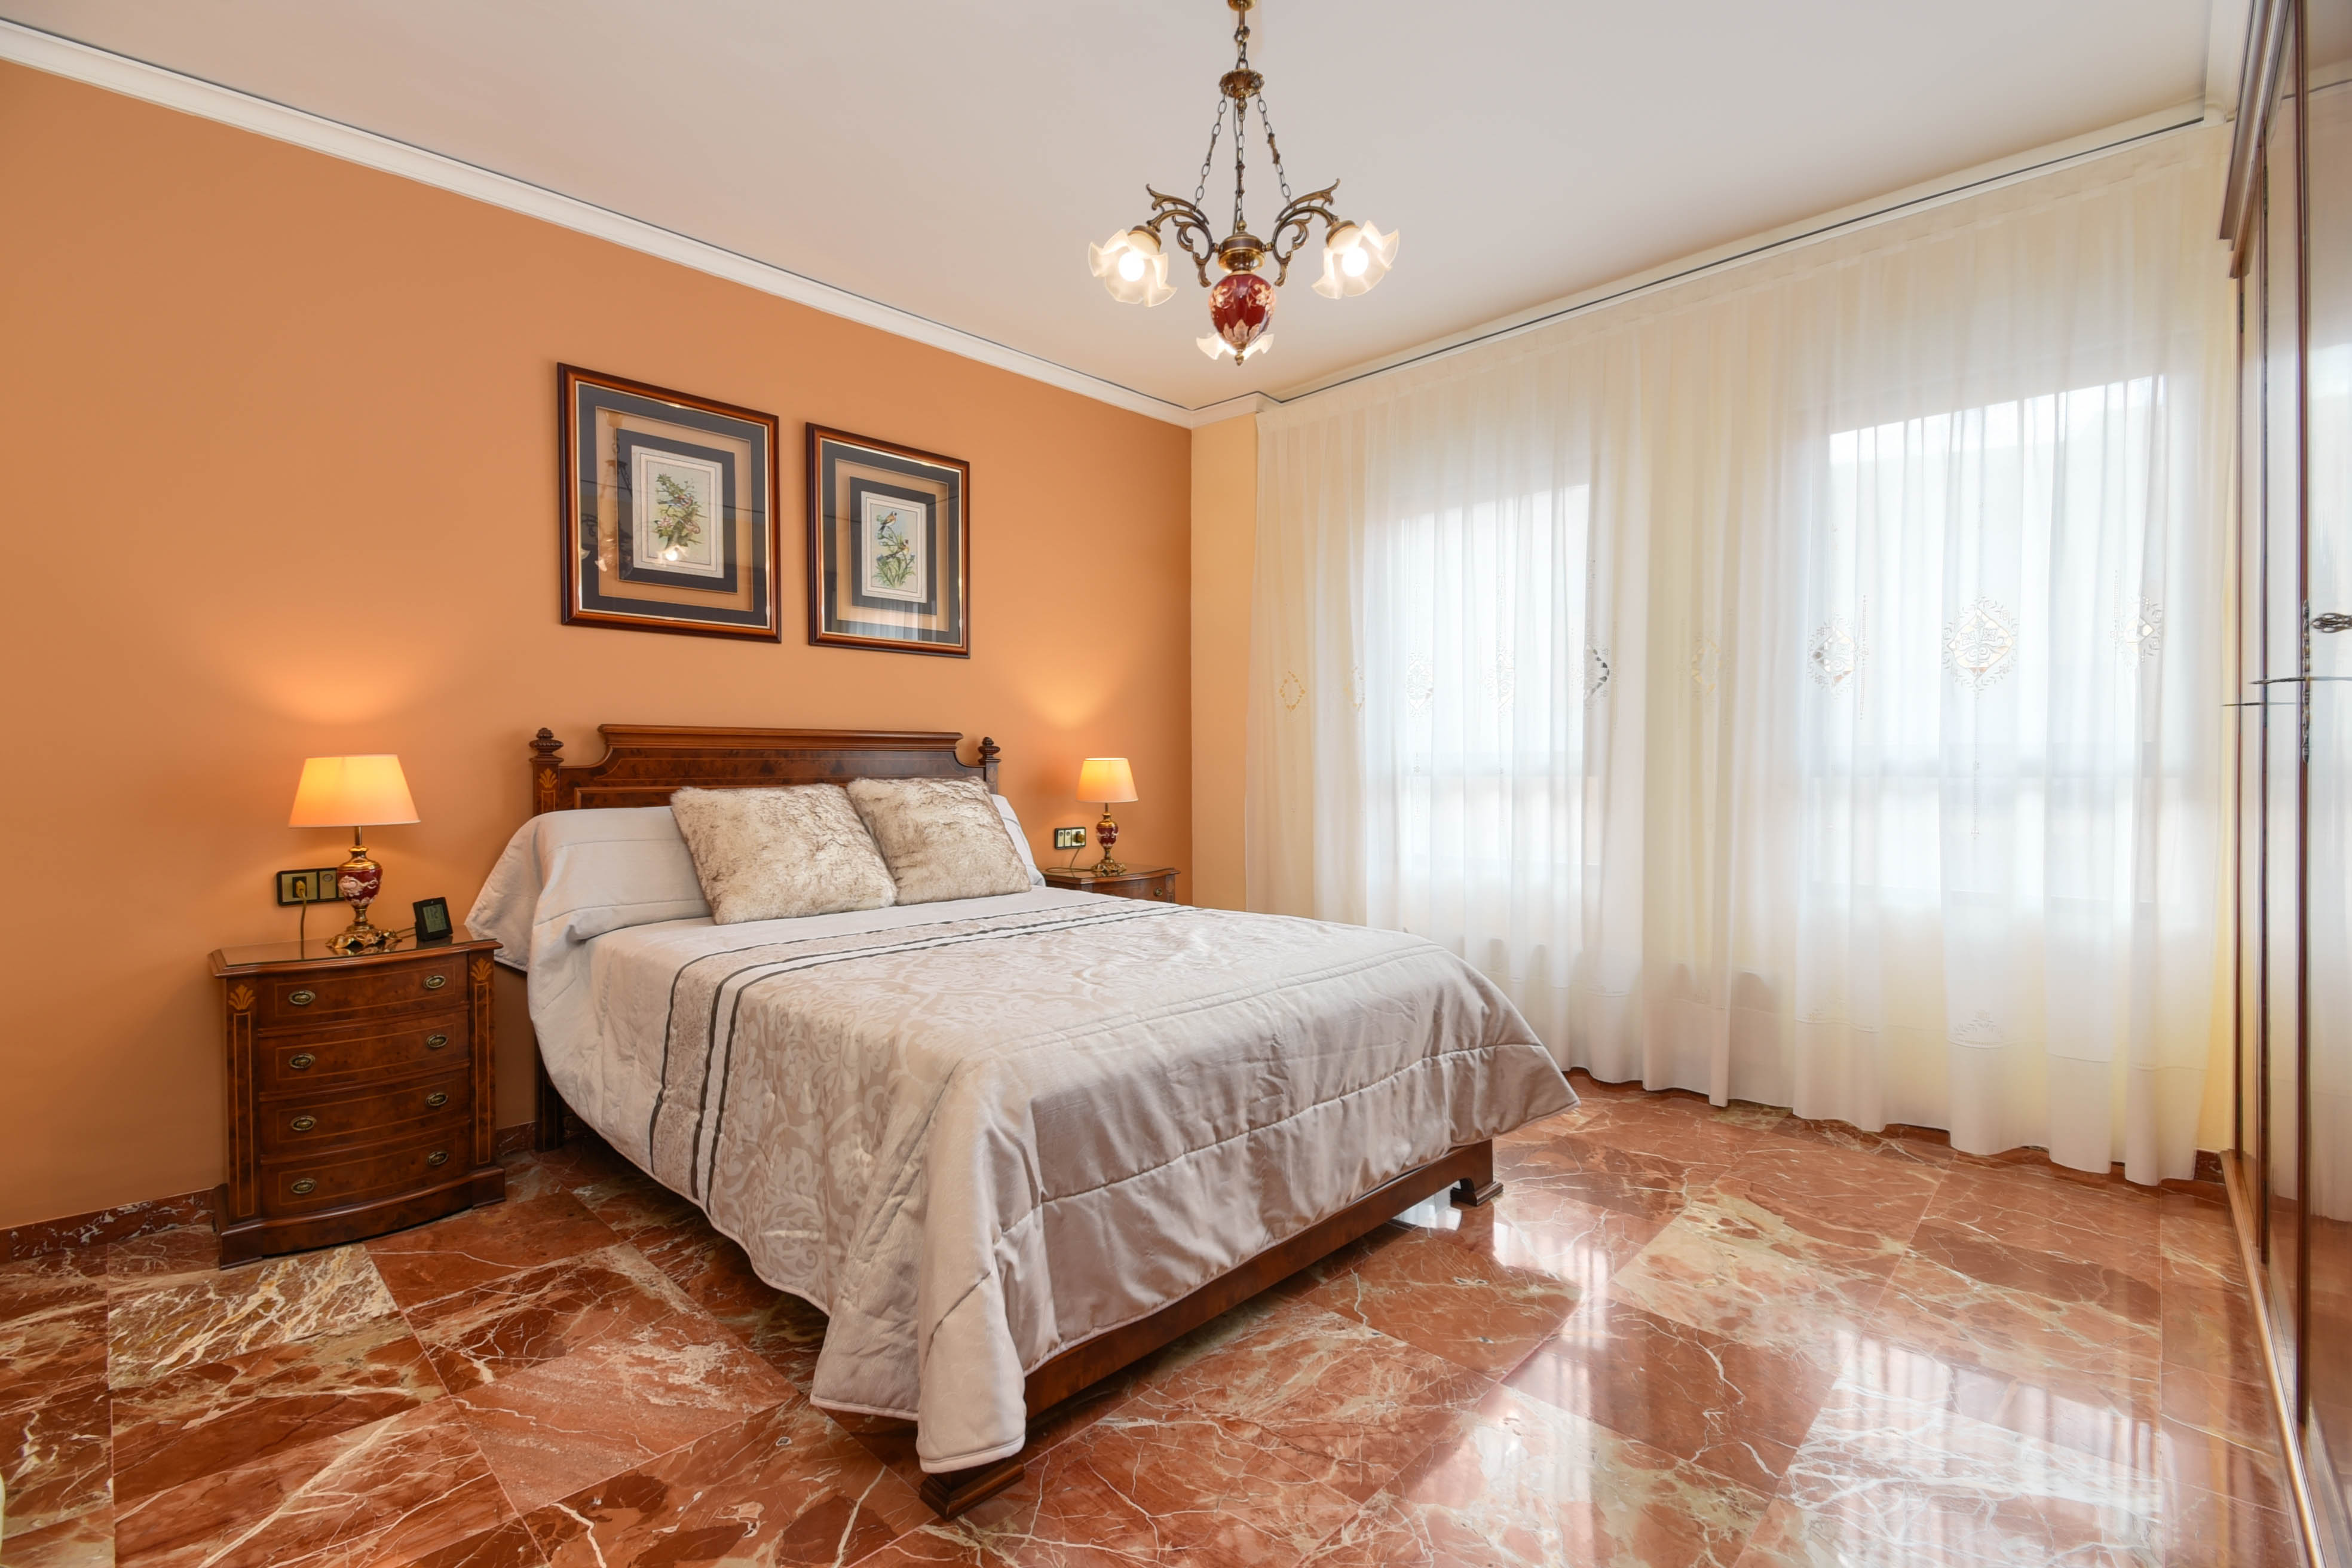 For sale luxurious town house or villa in Benissa